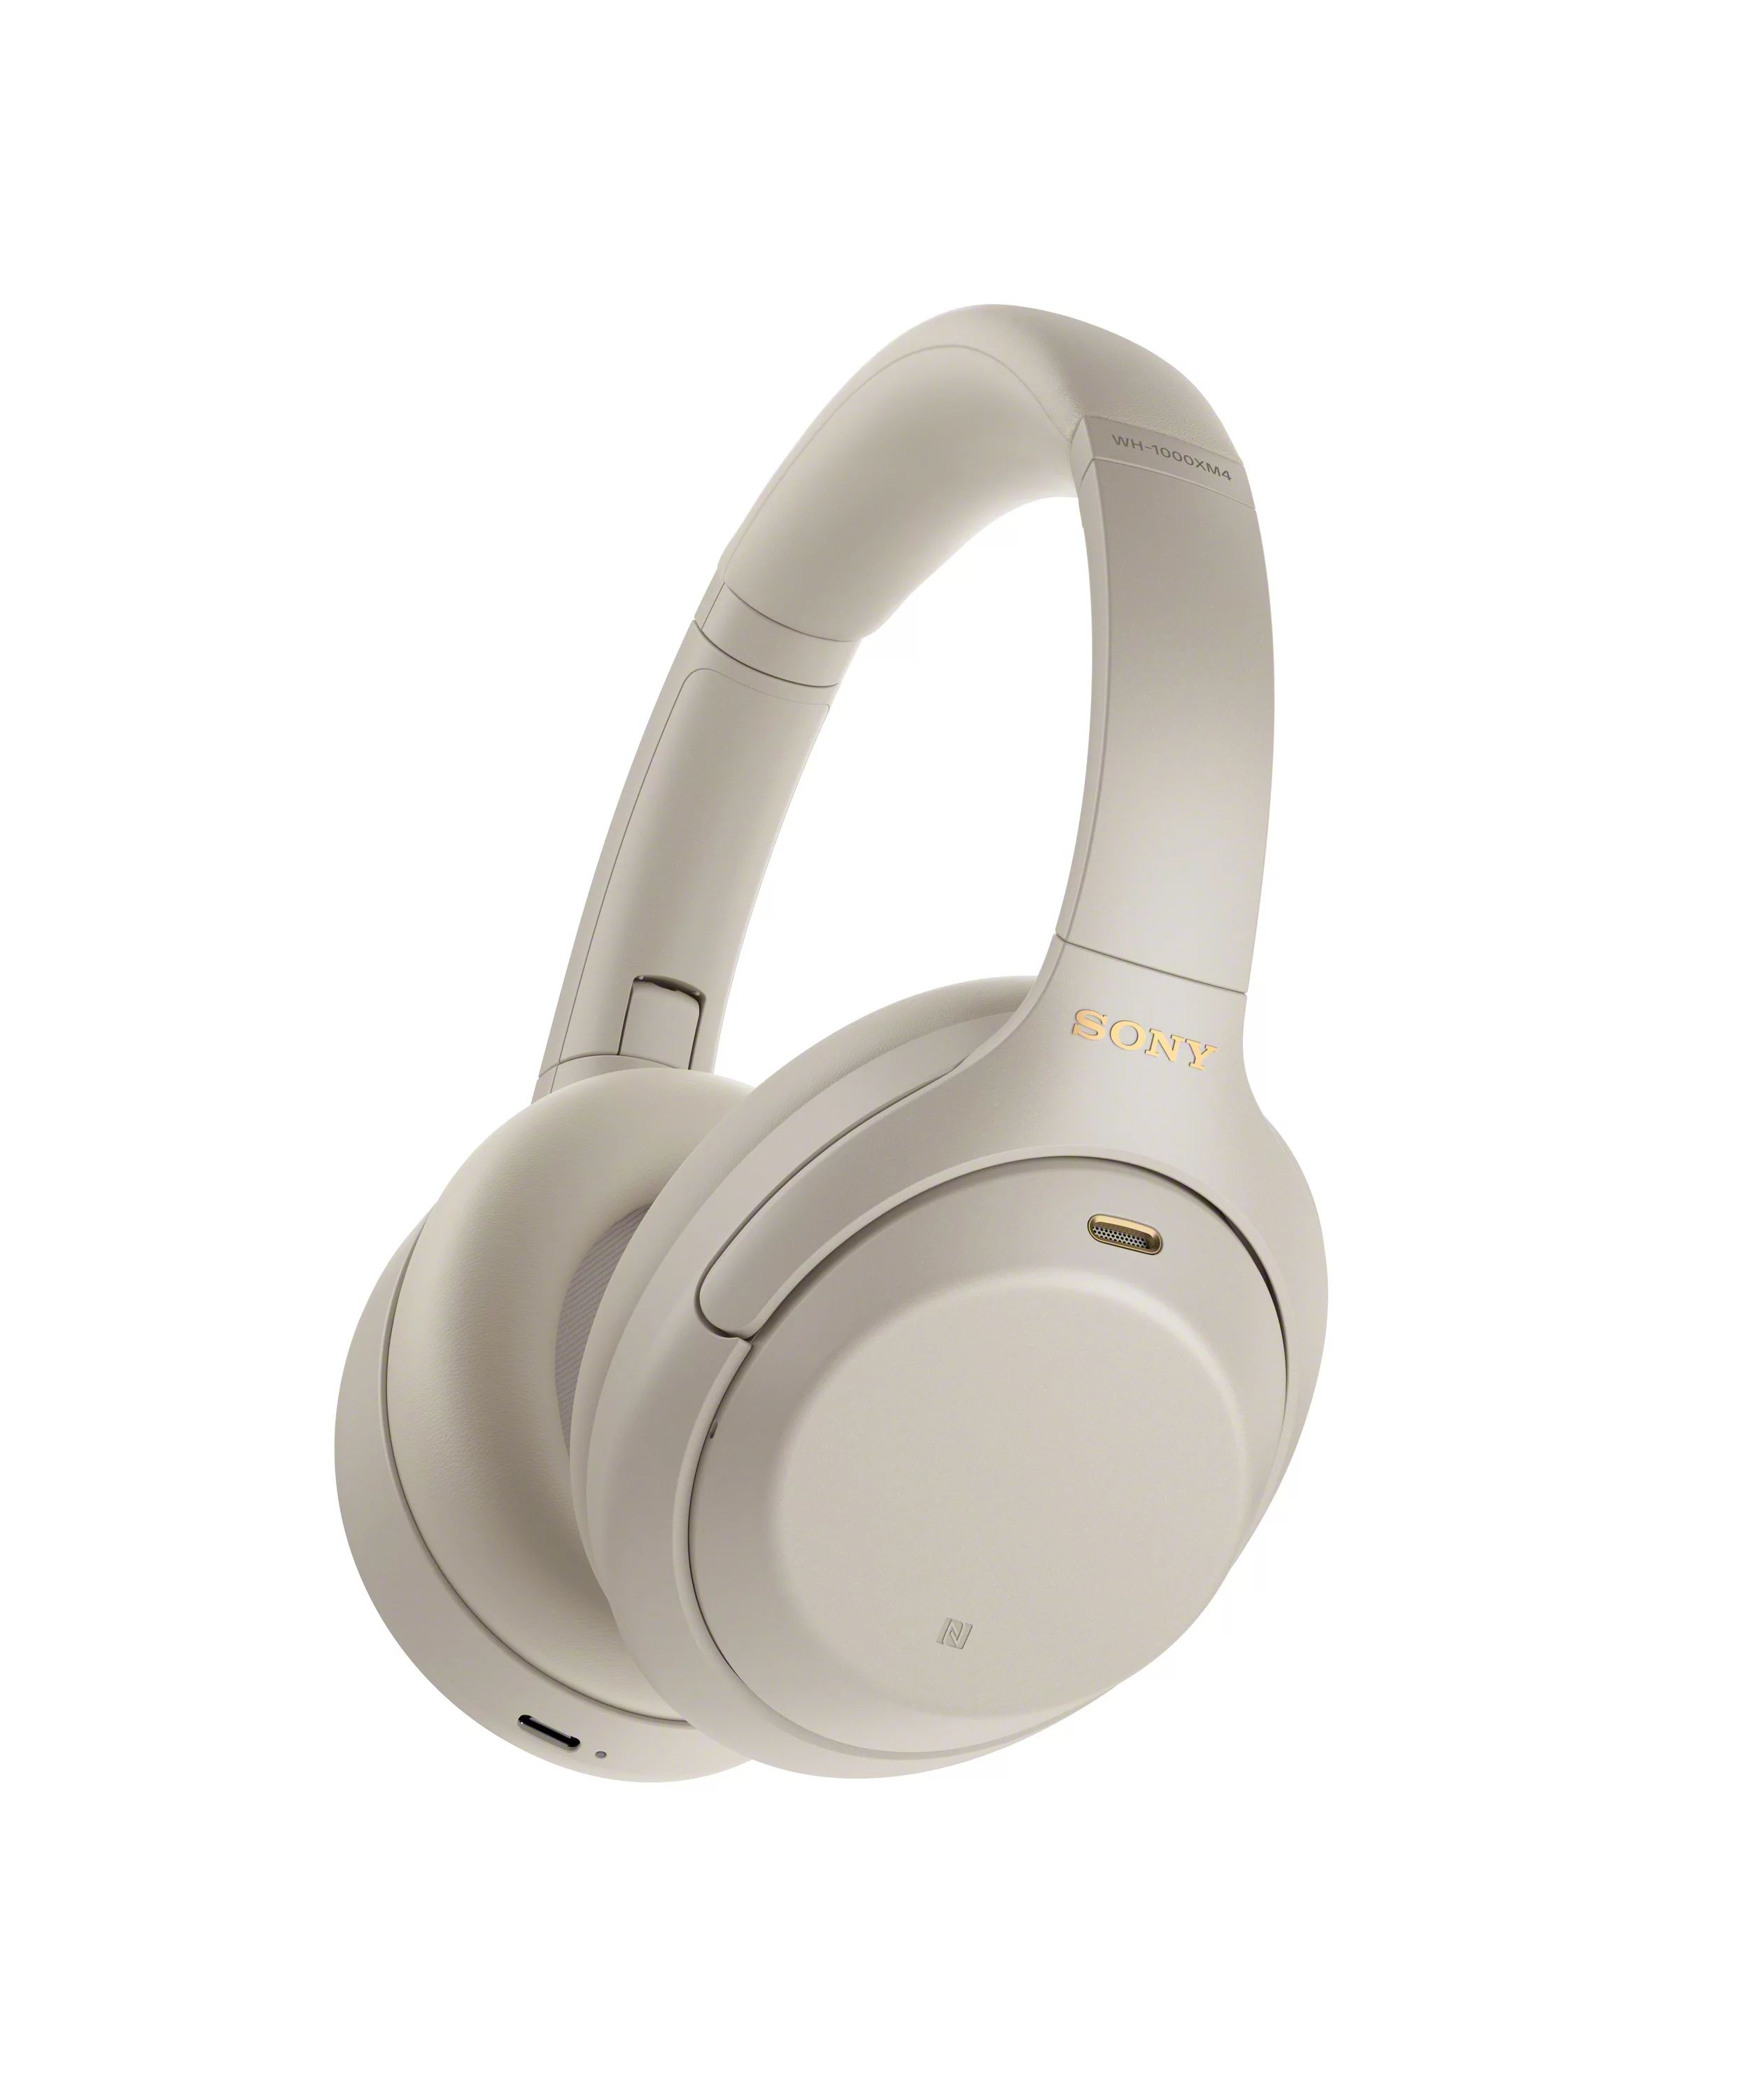 Sony WH-1000XM4 Wireless Noise Canceling Over-the-Ear Headphones with Google Assistant - Silver | Walmart (US)